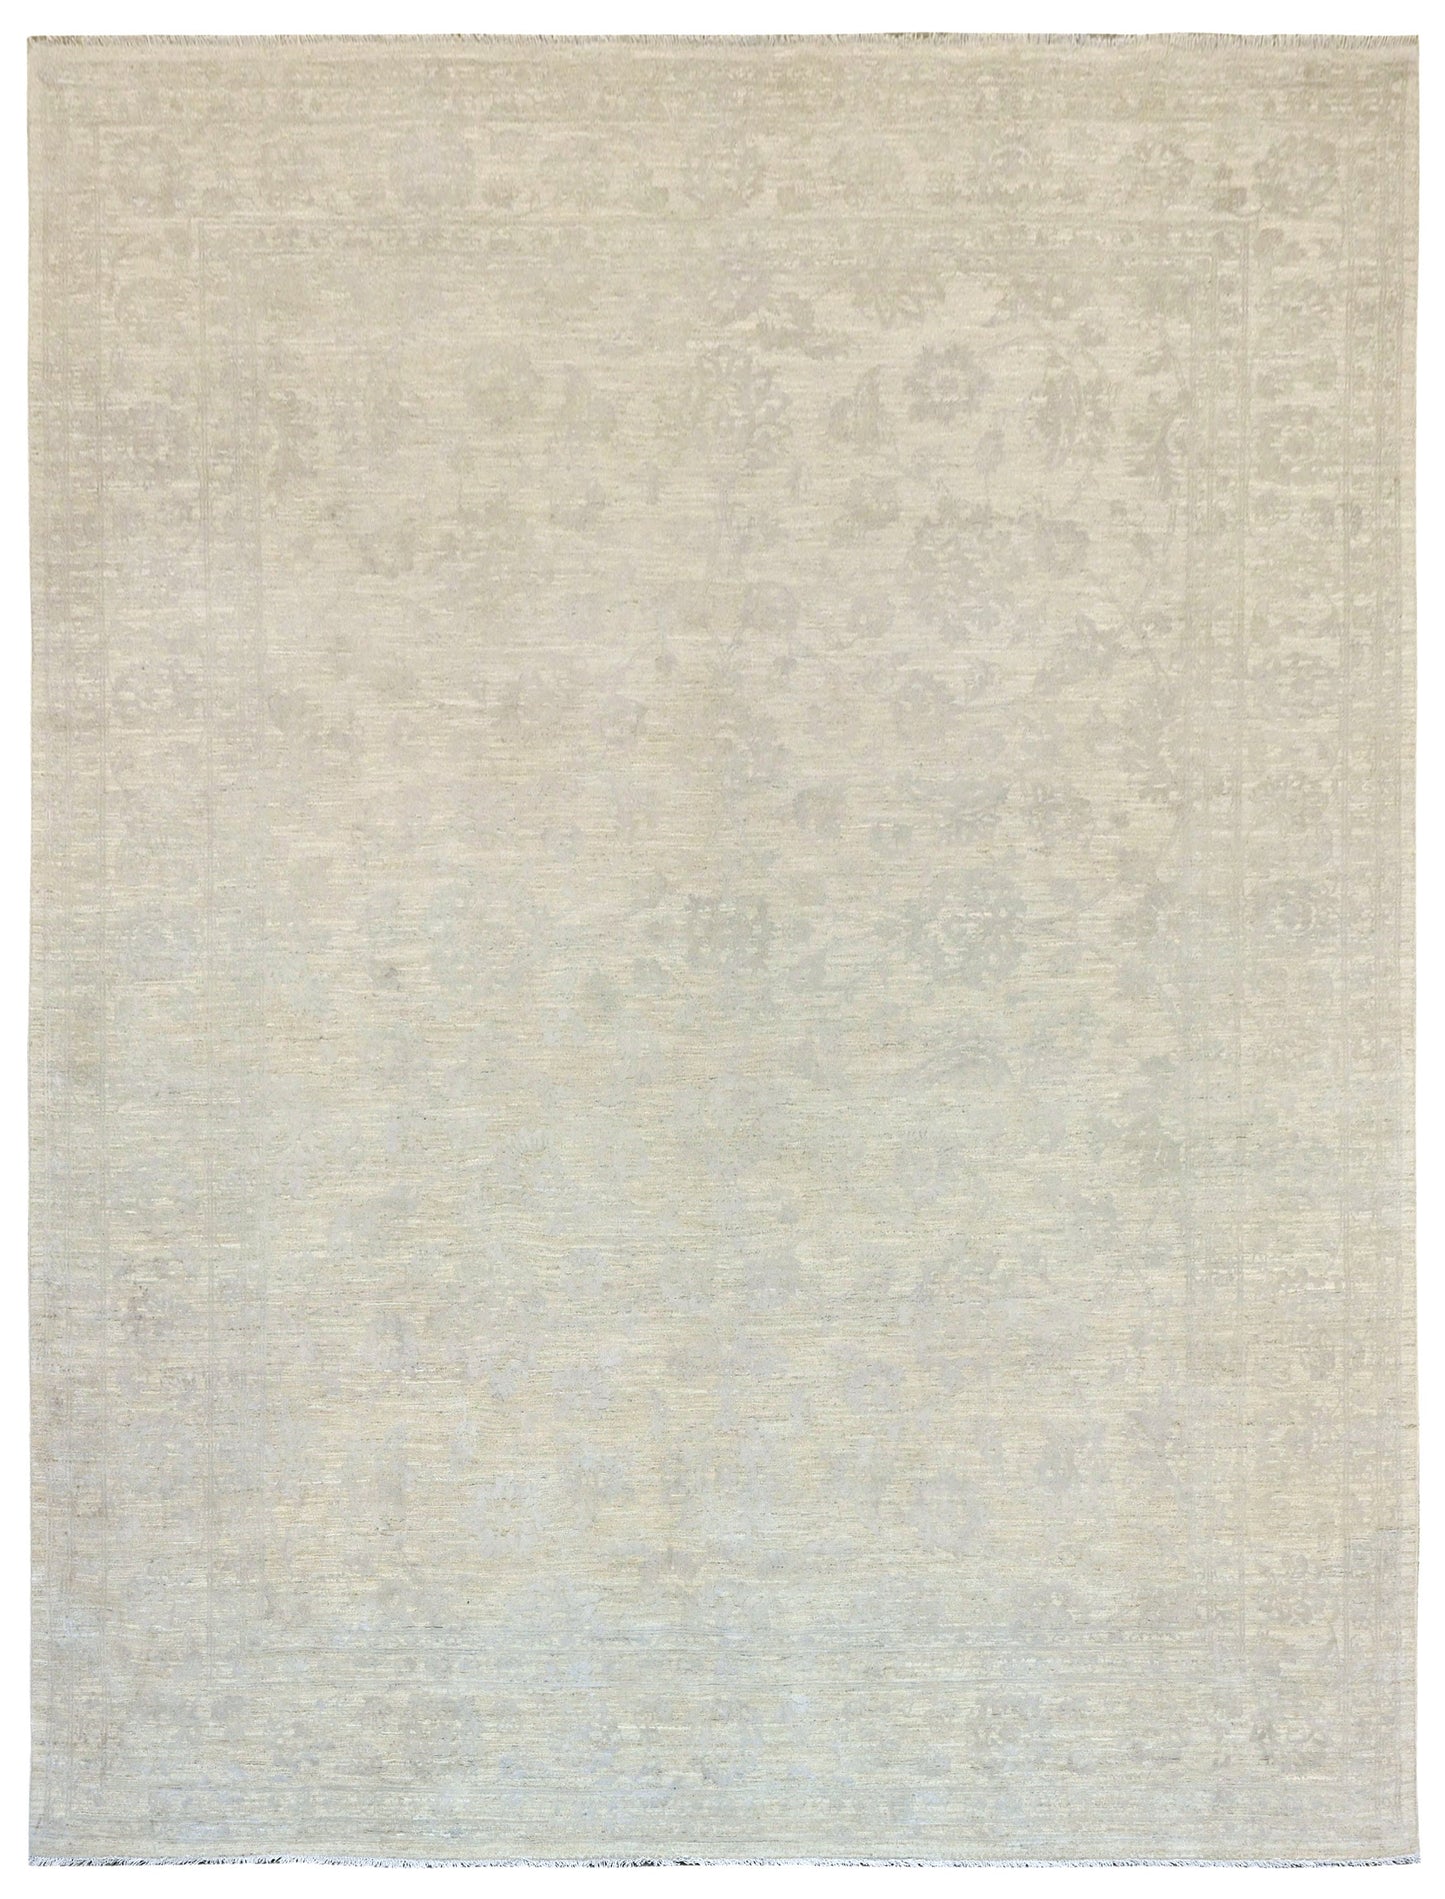 Lotus Shah Abbas Carpet | 11'10'' x 9'1" | New Wool Rug | Genuine Hand-knotted Area Rug